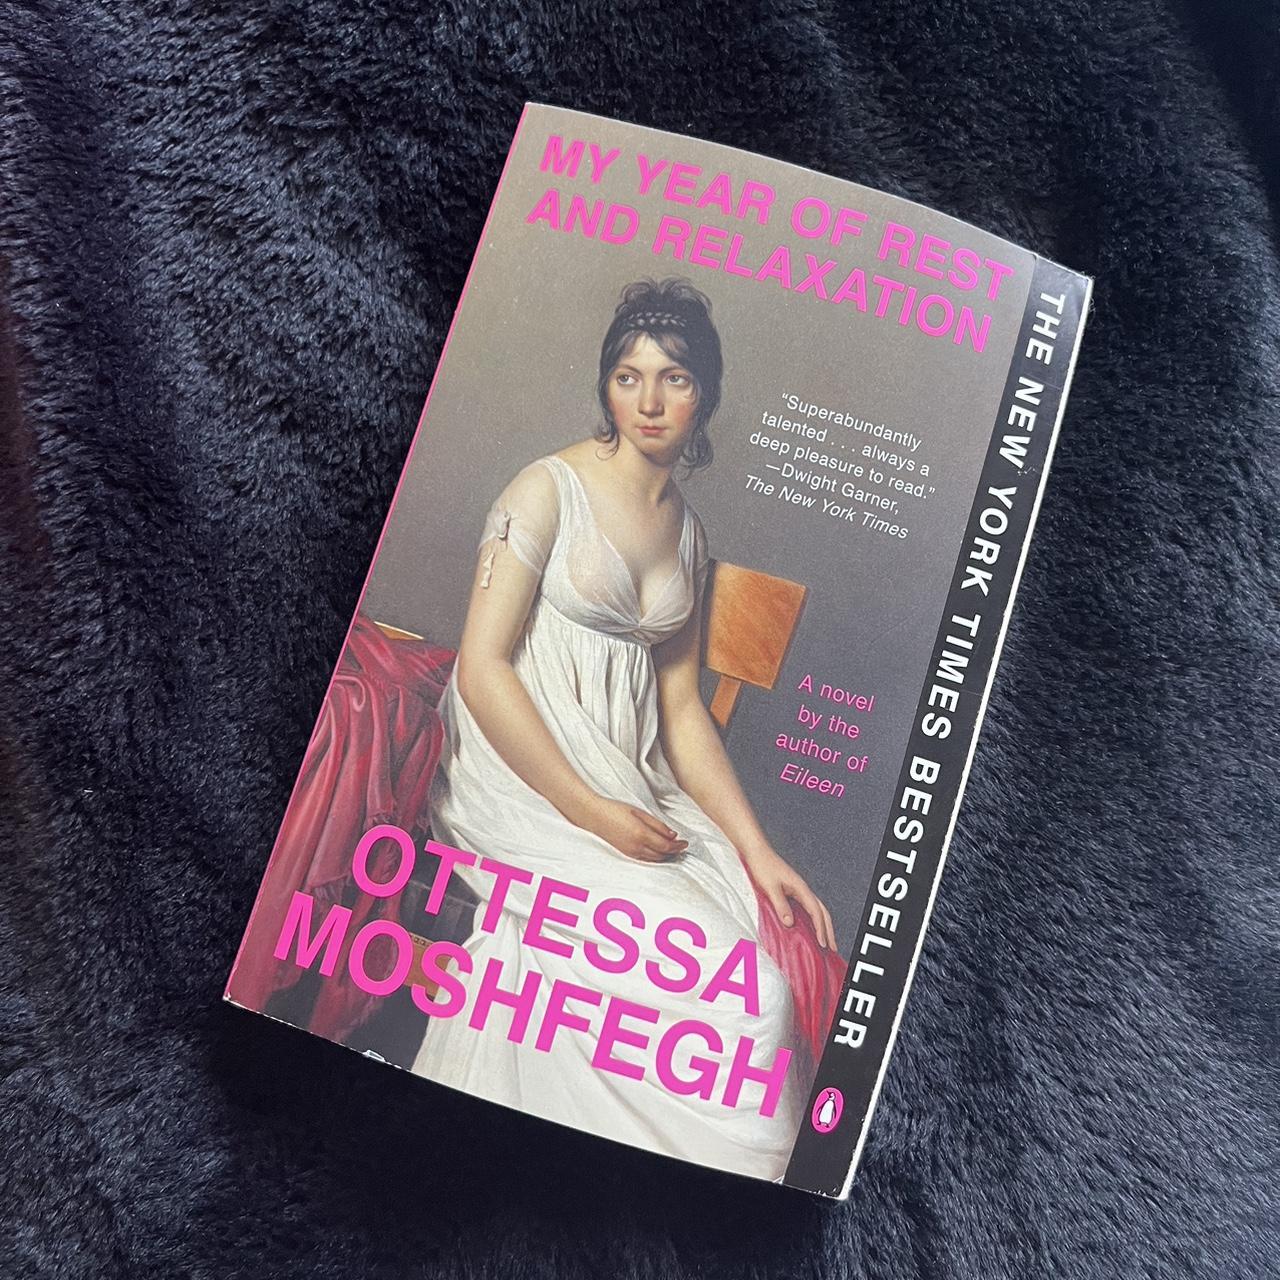 My Year Of Rest And Relaxation by Ottessa Moshfegh. - Depop